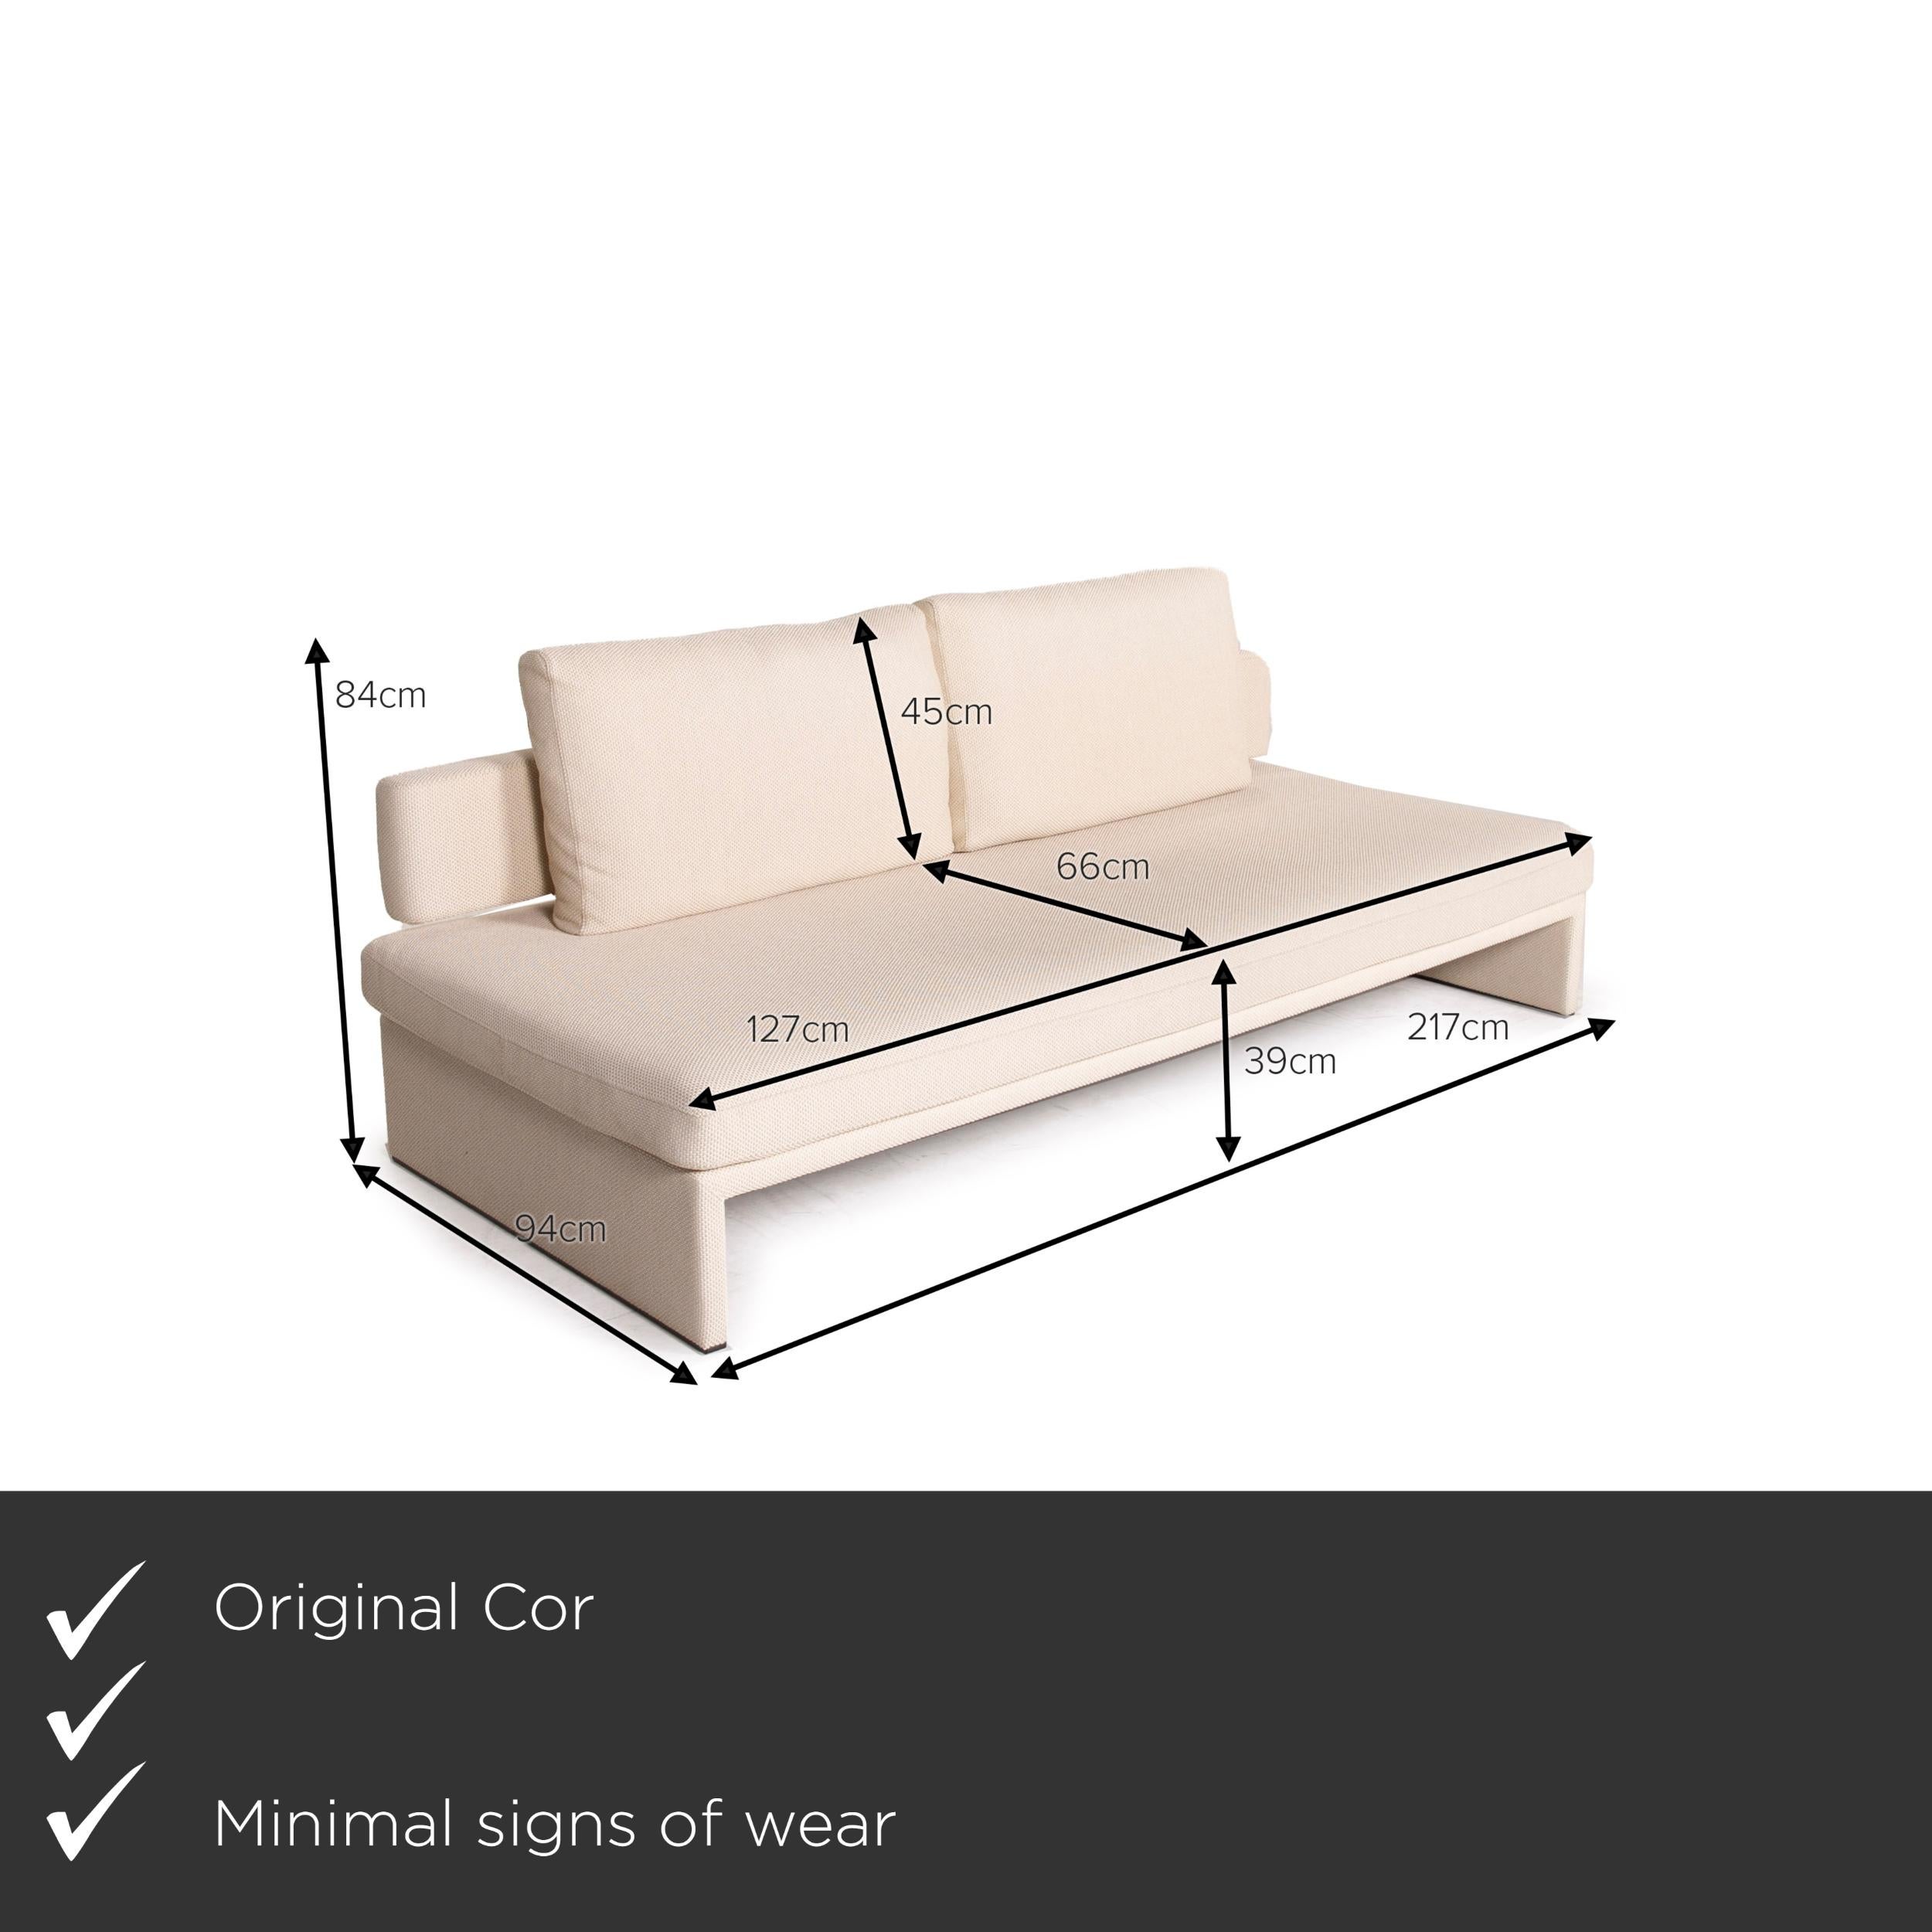 We present to you a COR fabric sofa cream three-seater.
 

 Product measurements in centimeters:
 

Depth: 94
Width: 217
Height: 84
Seat height: 39
Rest height: 27
Seat depth: 66
Seat width: 217
Back height: 45.
 